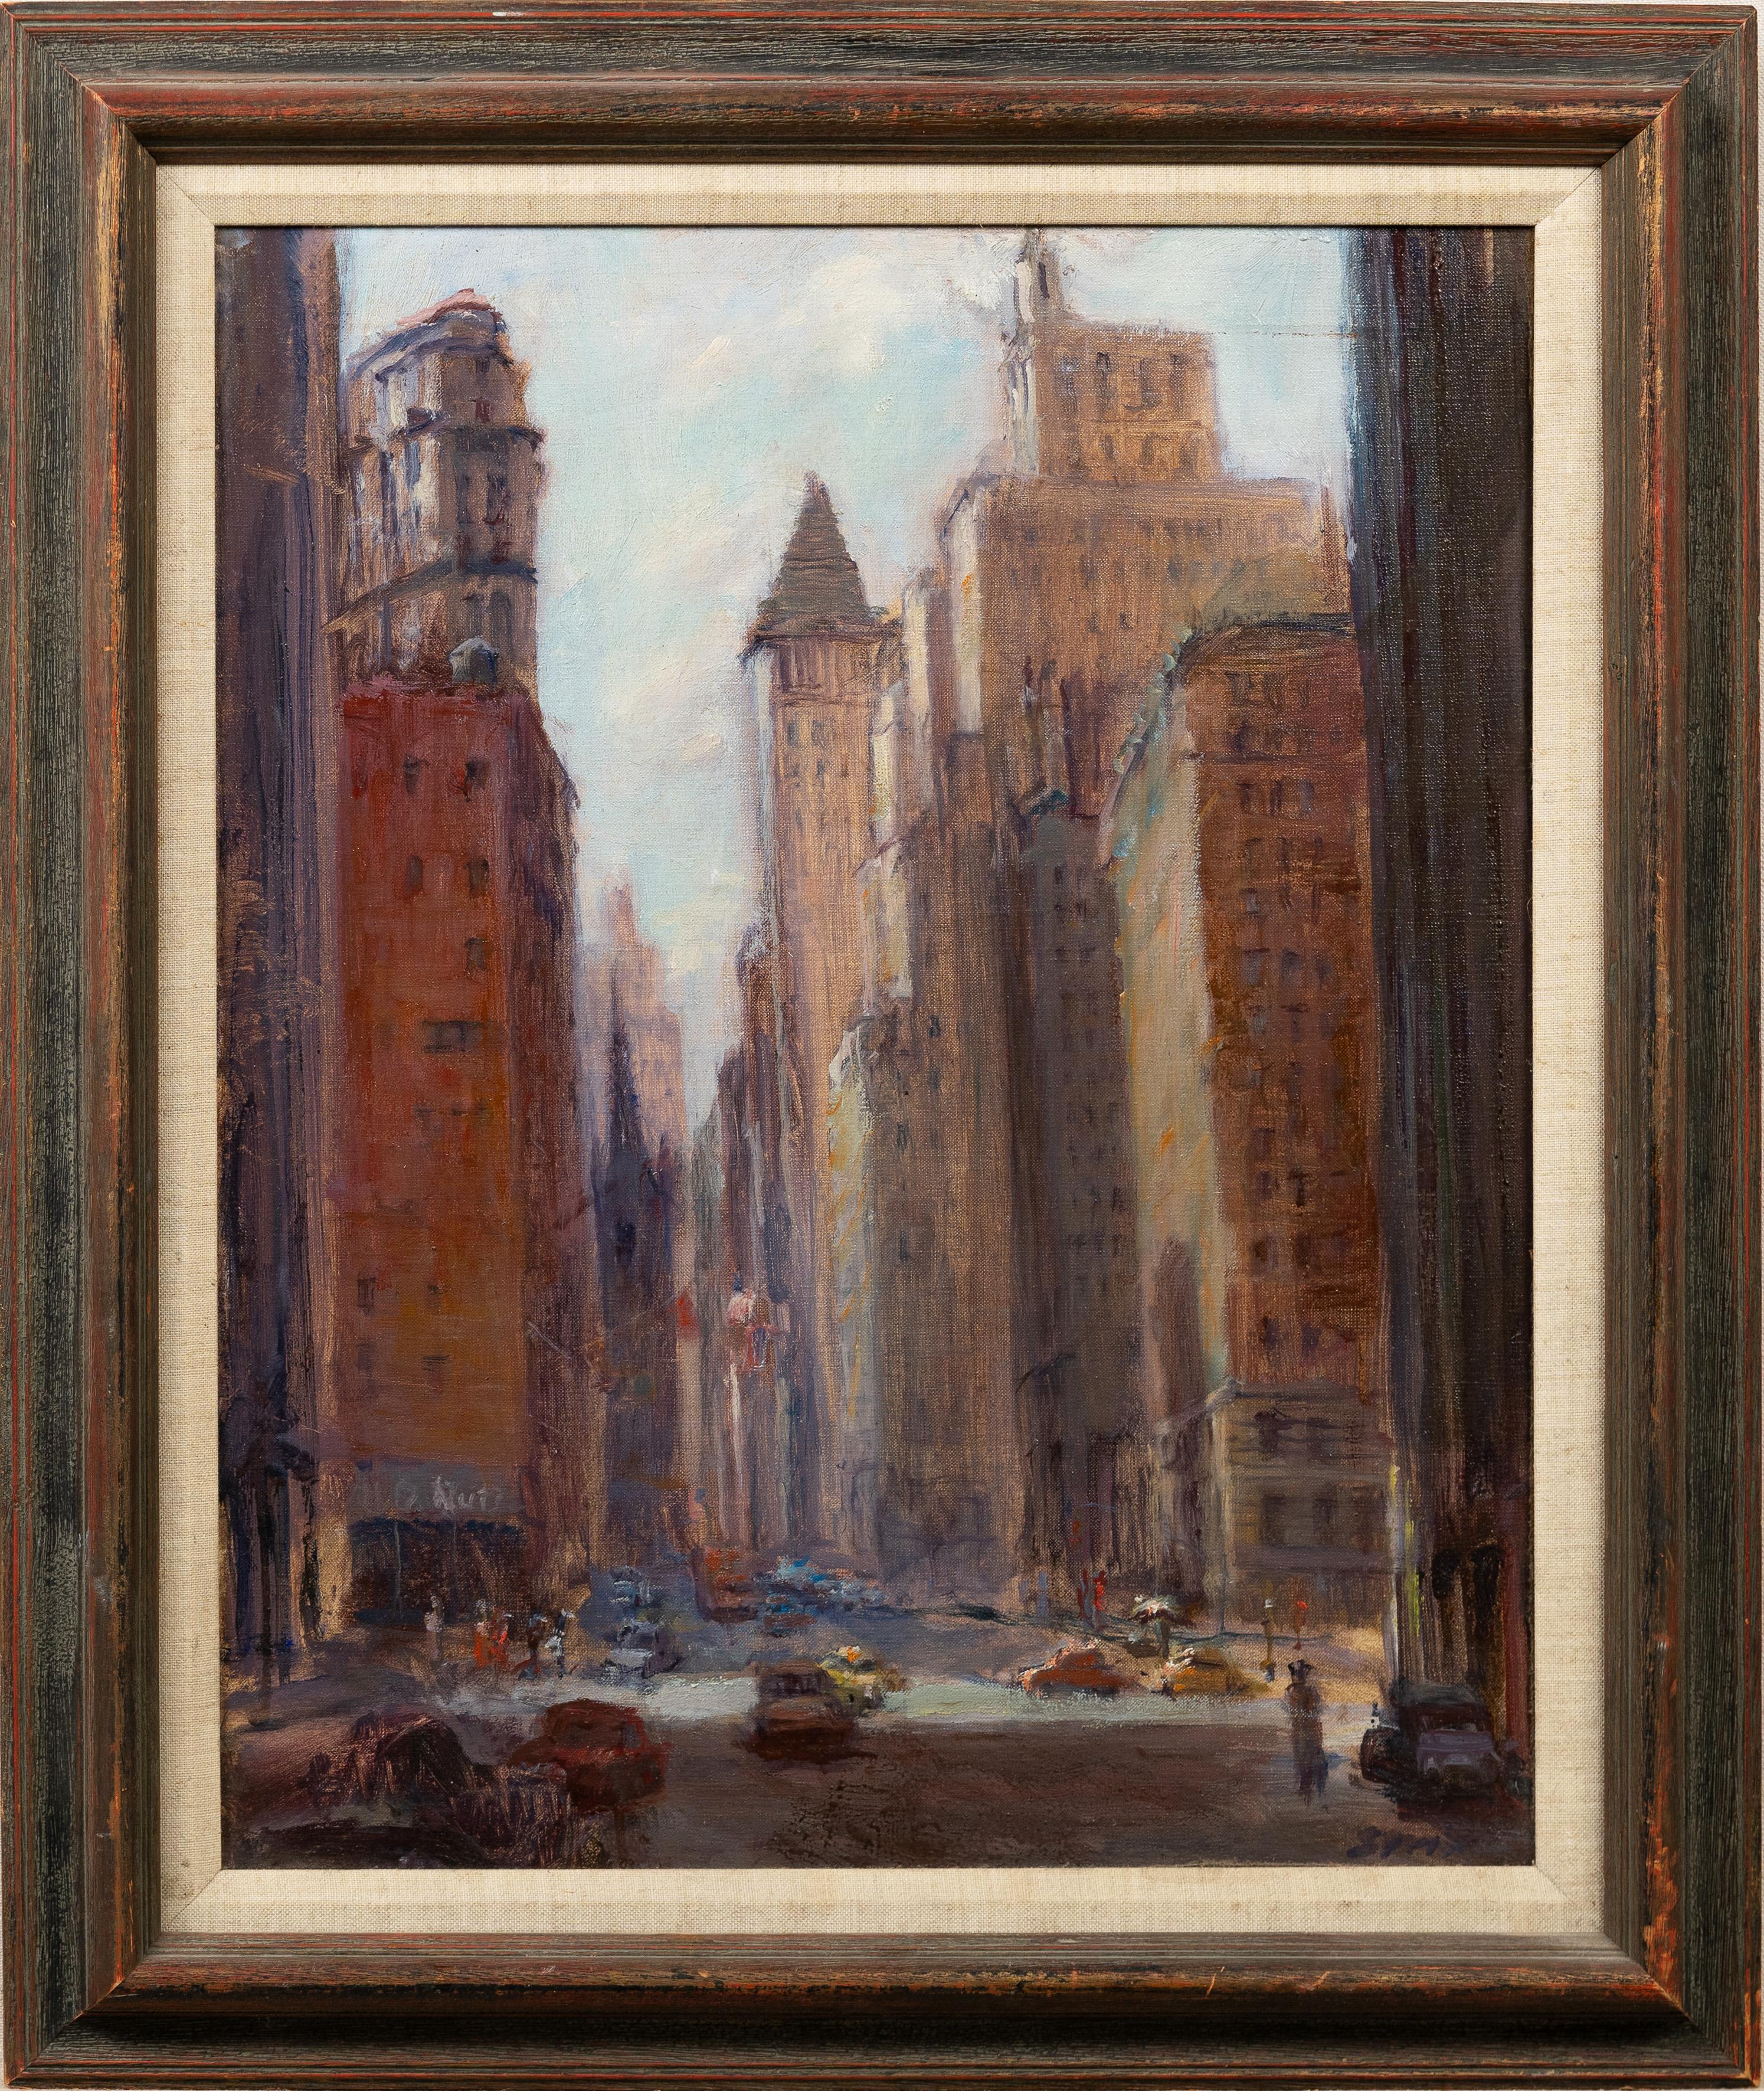 Antique American impressionist street scene oil painting by Anthony Springer (1928 - 1995). Oil on canvas. Framed. Signed. Image size size, 21H x 17L.